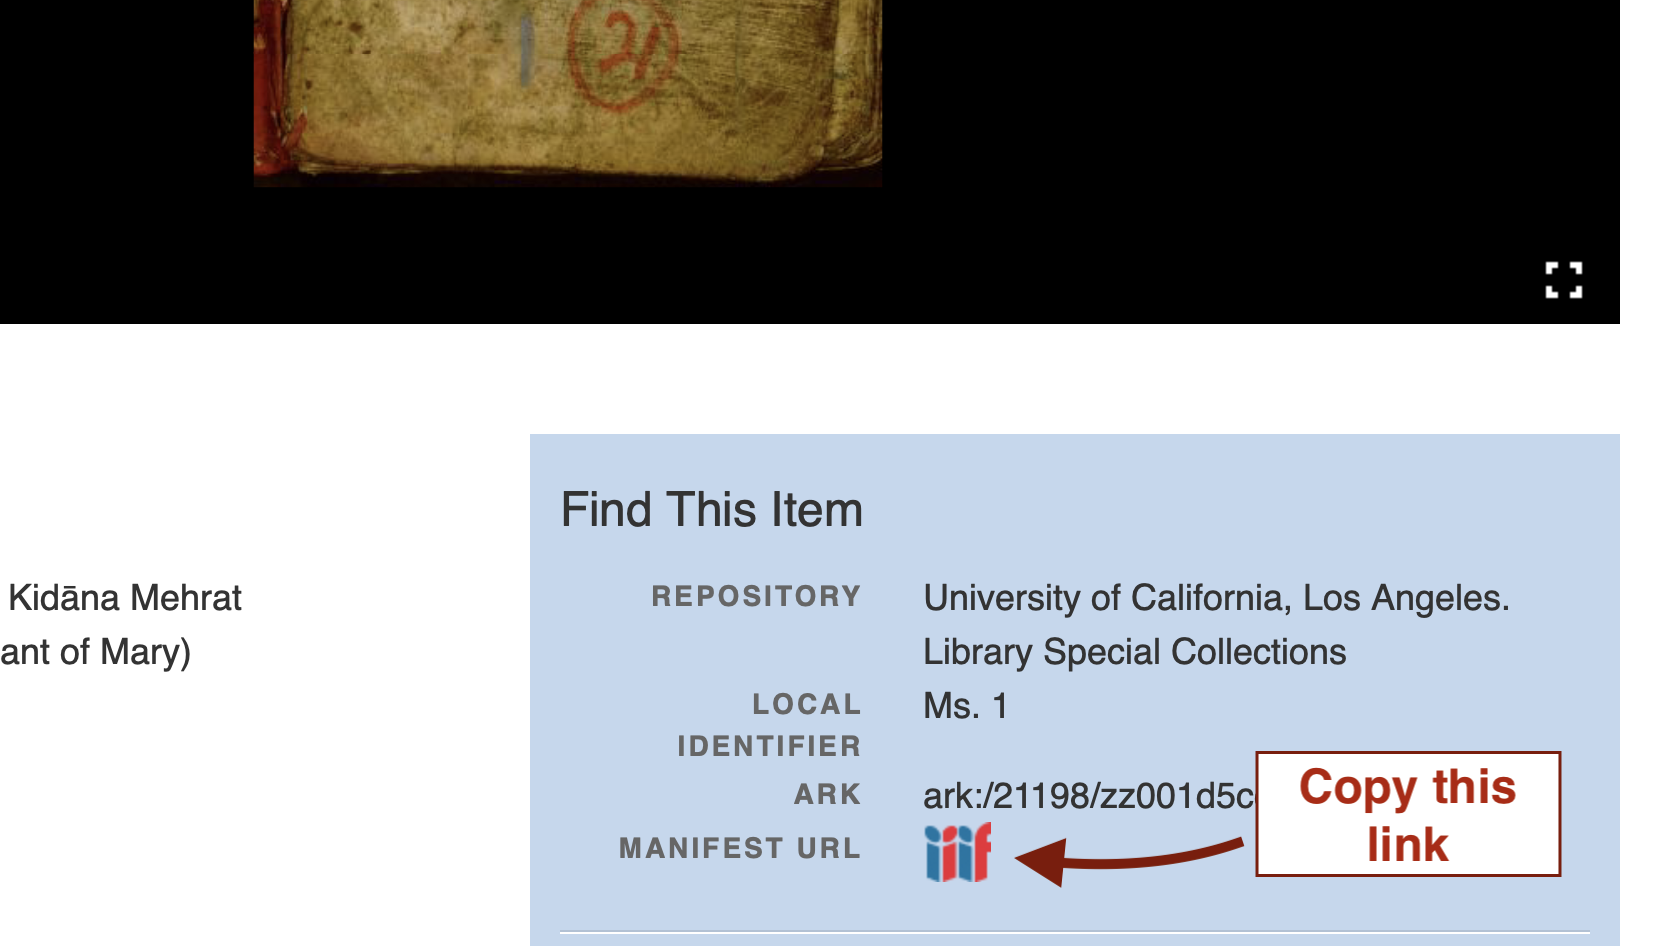 Copy the IIIF manifest from the logo or click to open the manifest in a new window